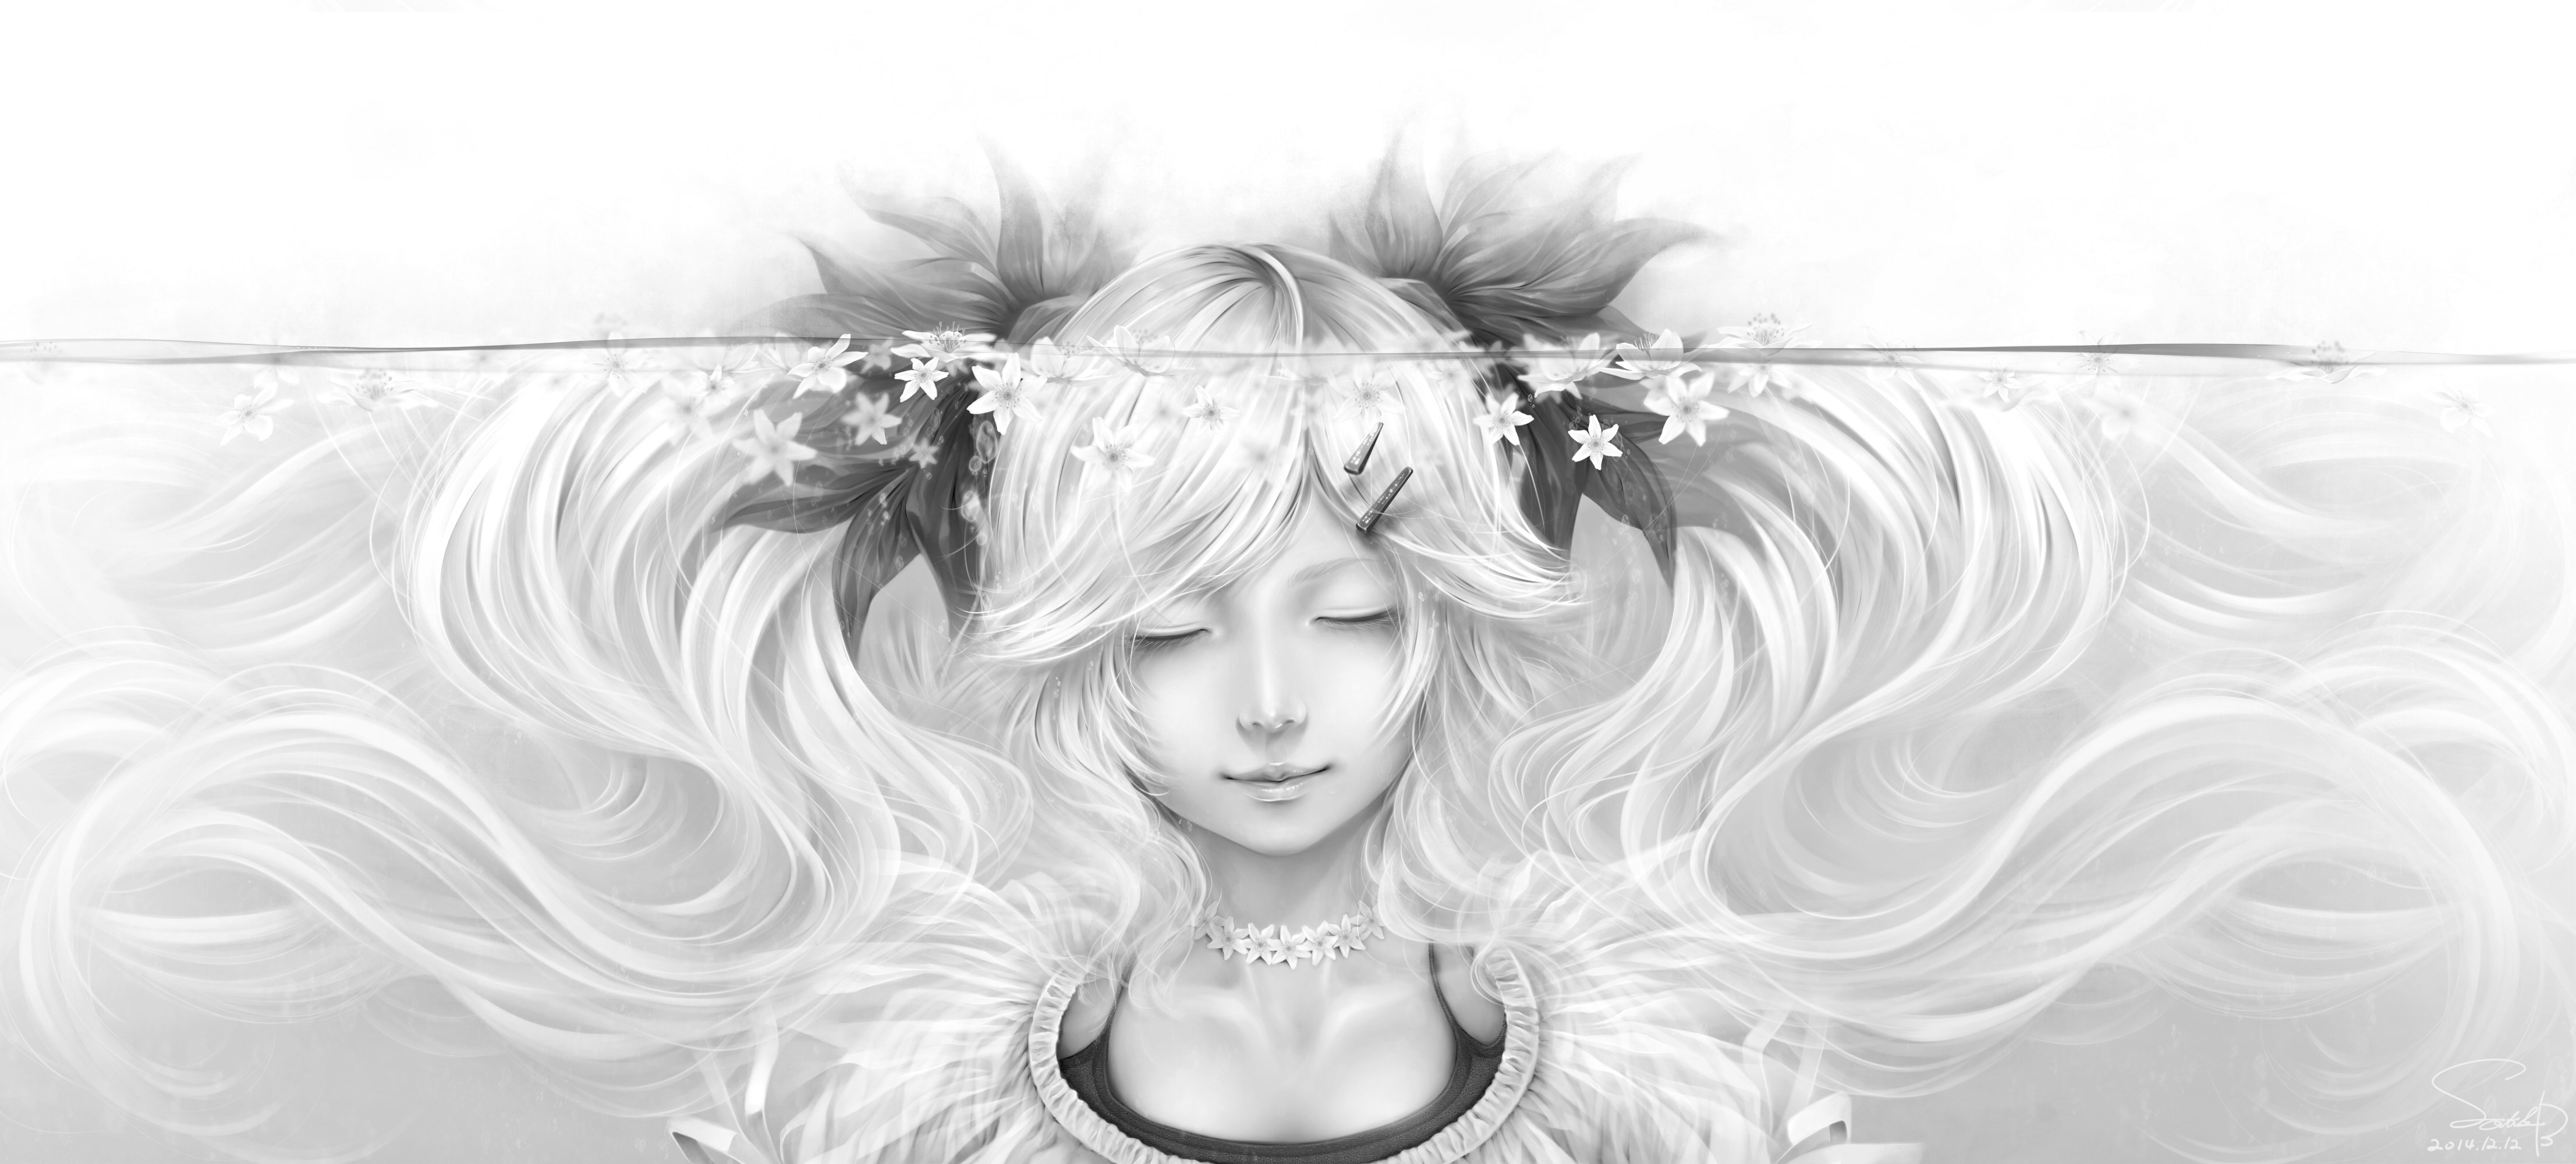 bouno, Satoshi, Flowers, Long, Hair, Monochrome, Necklace, Original, Signed, Twintails, Underwater, Water, White Wallpaper